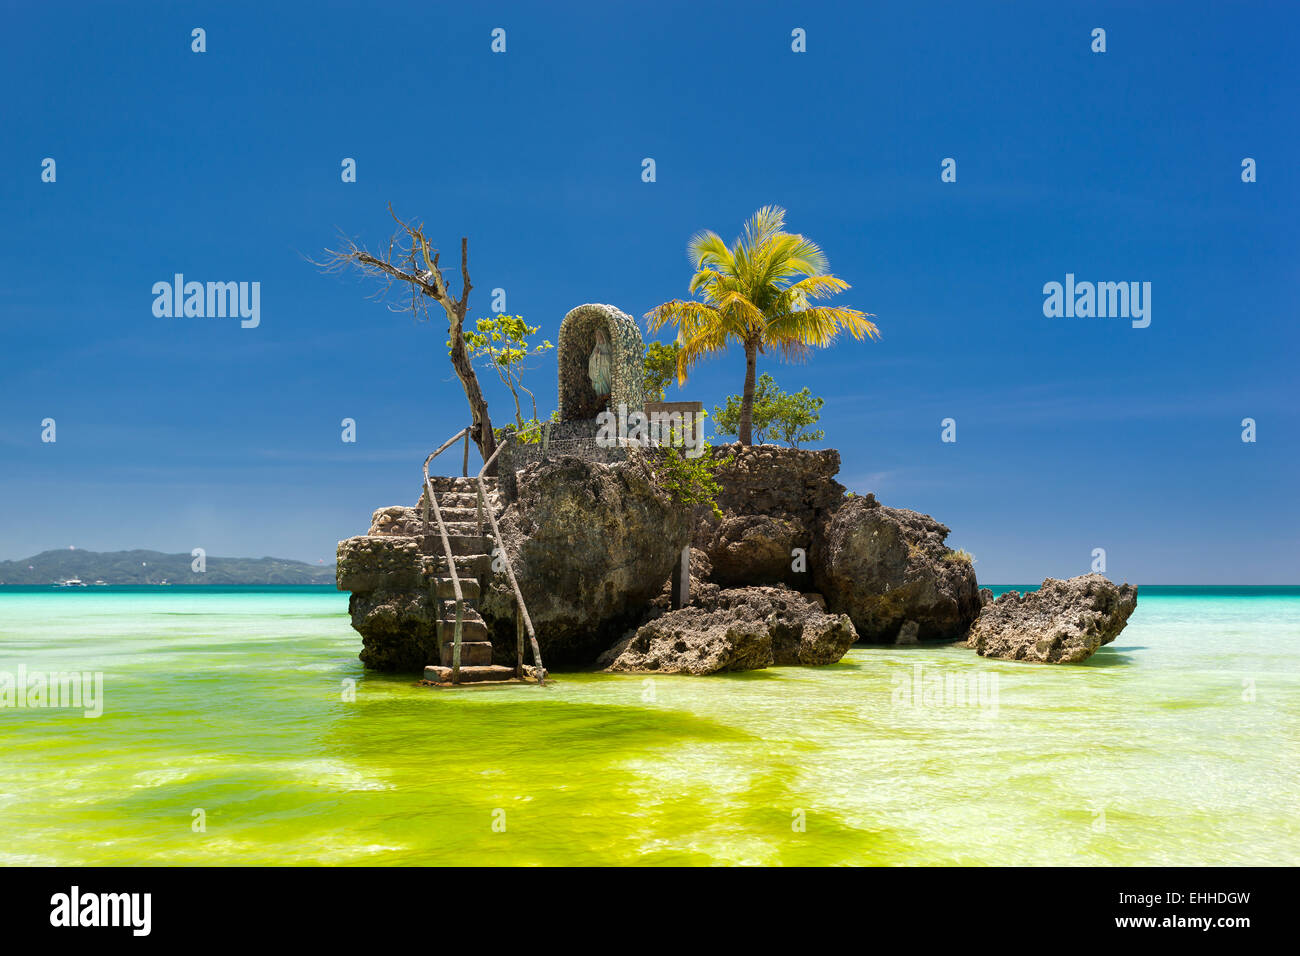 Willy's rock on island Boracay, Philippines. Boat Station One, White beach place. Stock Photo